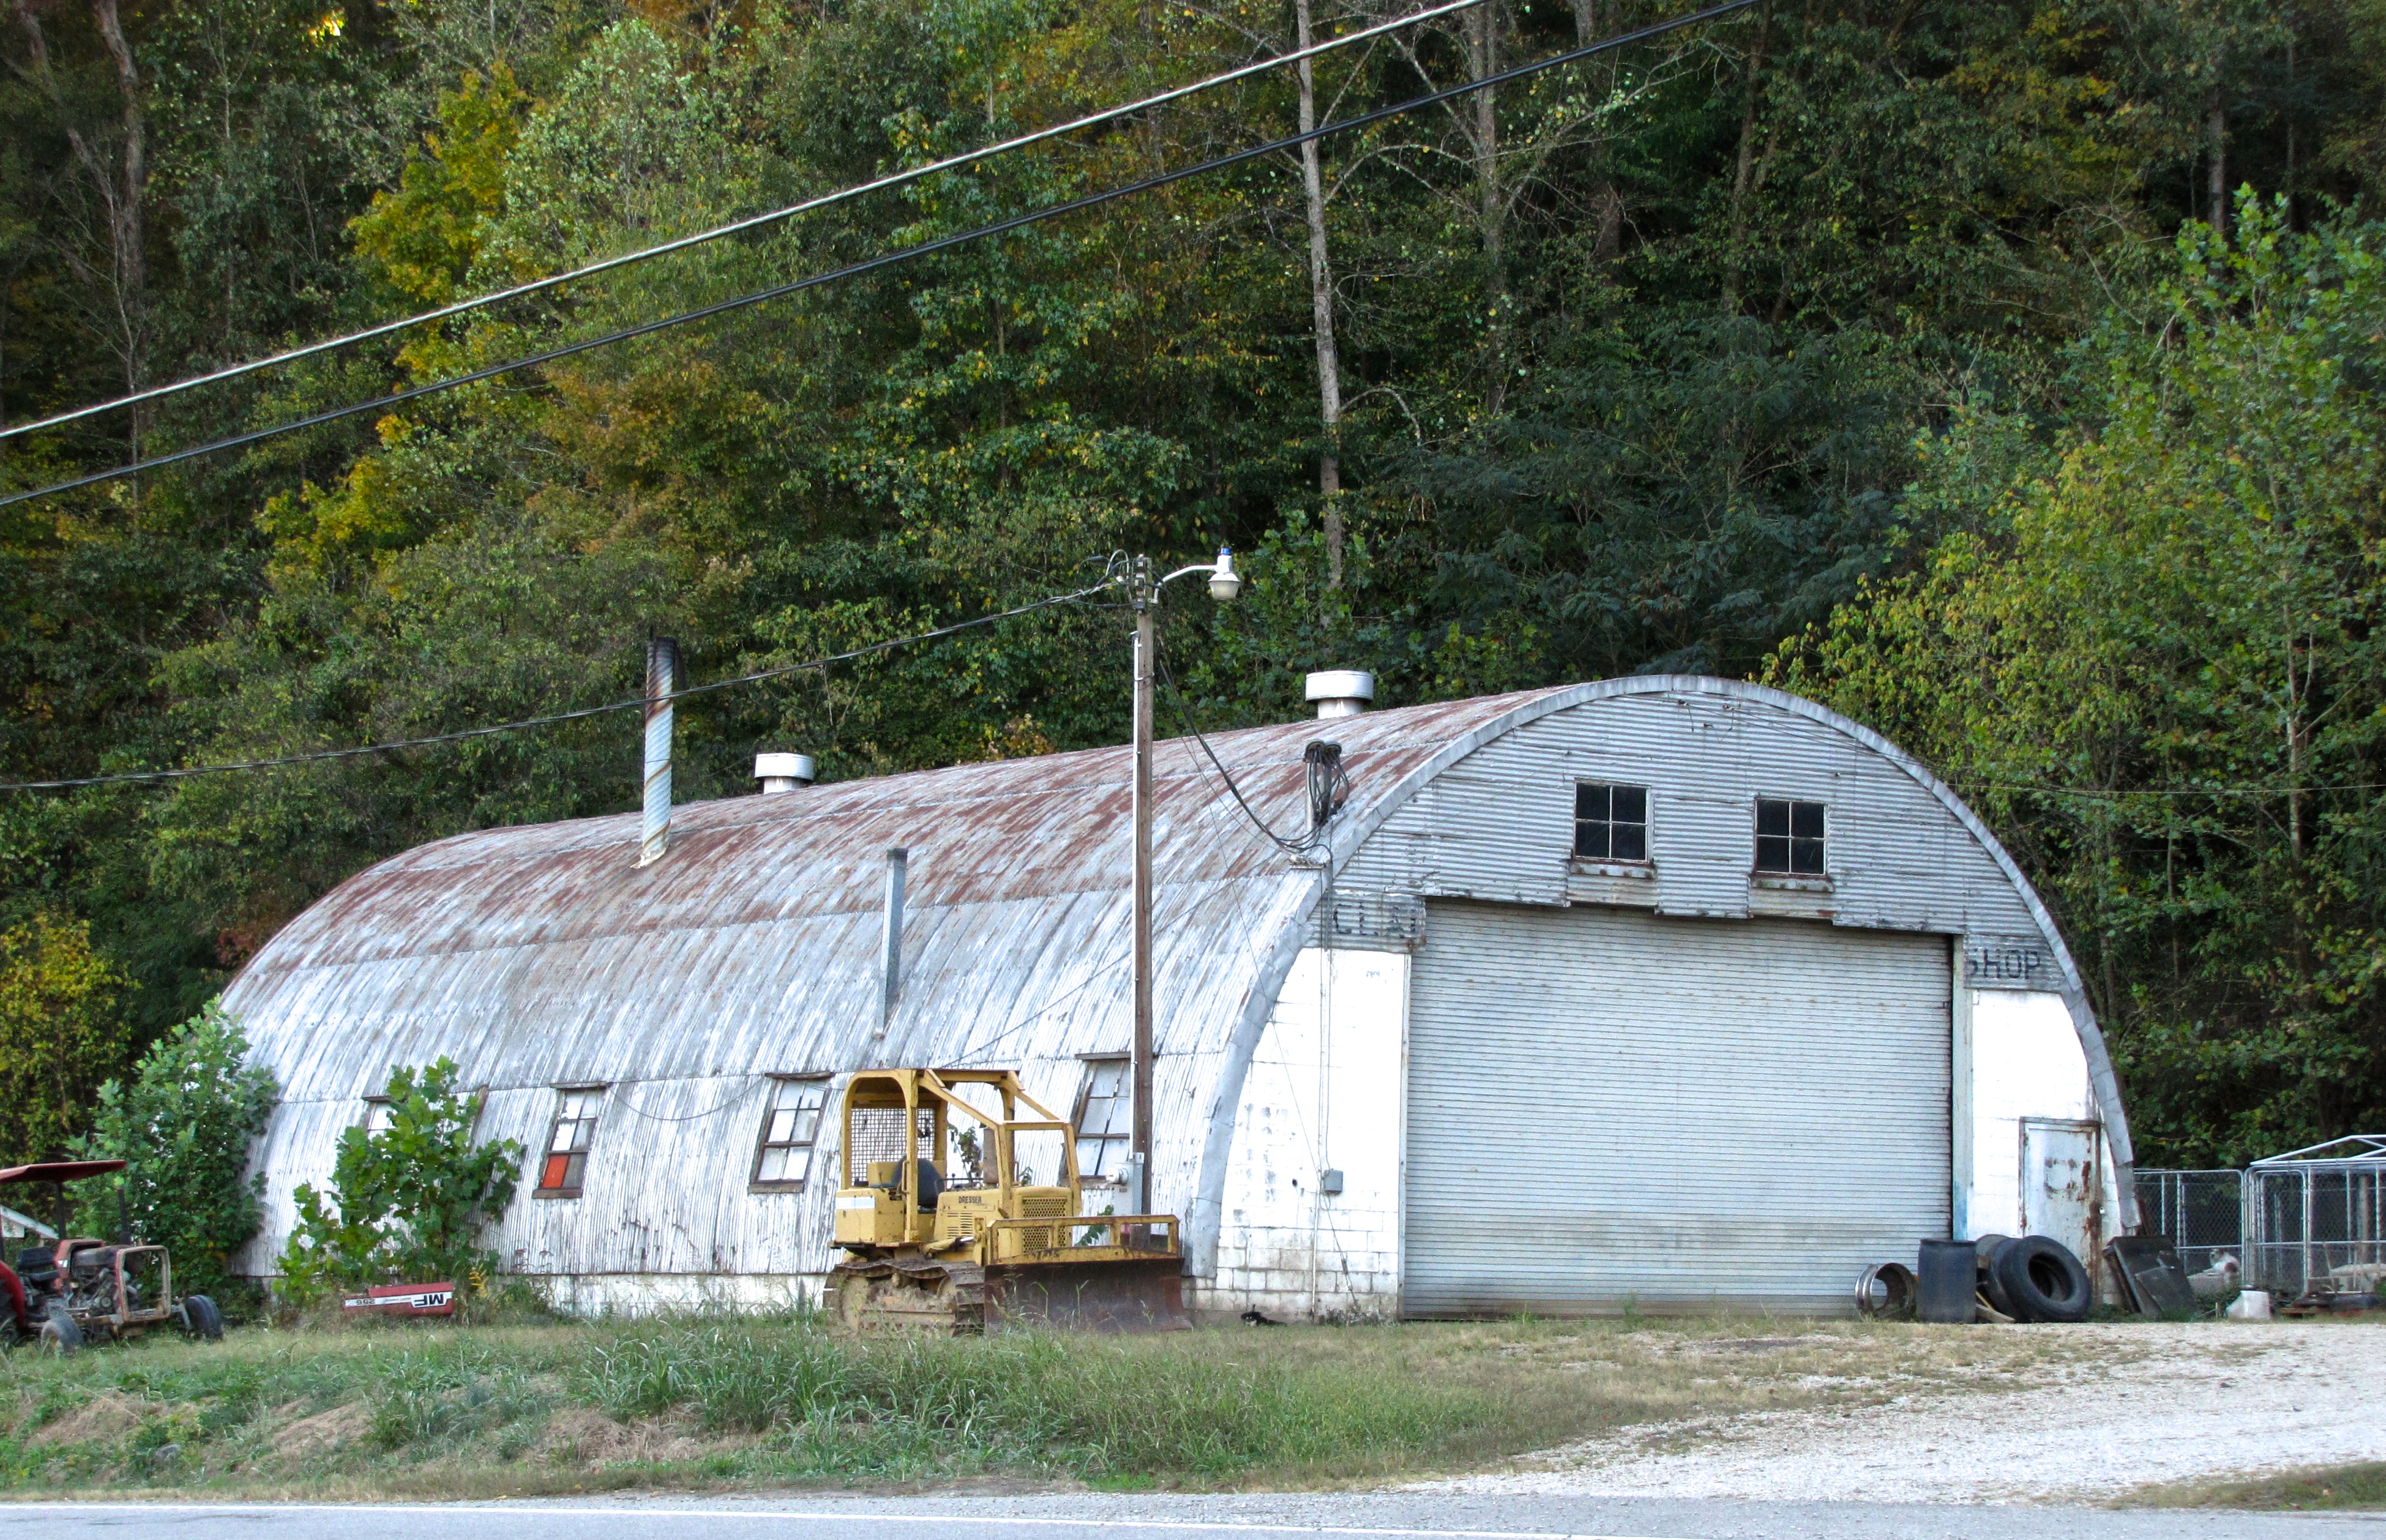 quonset hut in Indianapolis, IN